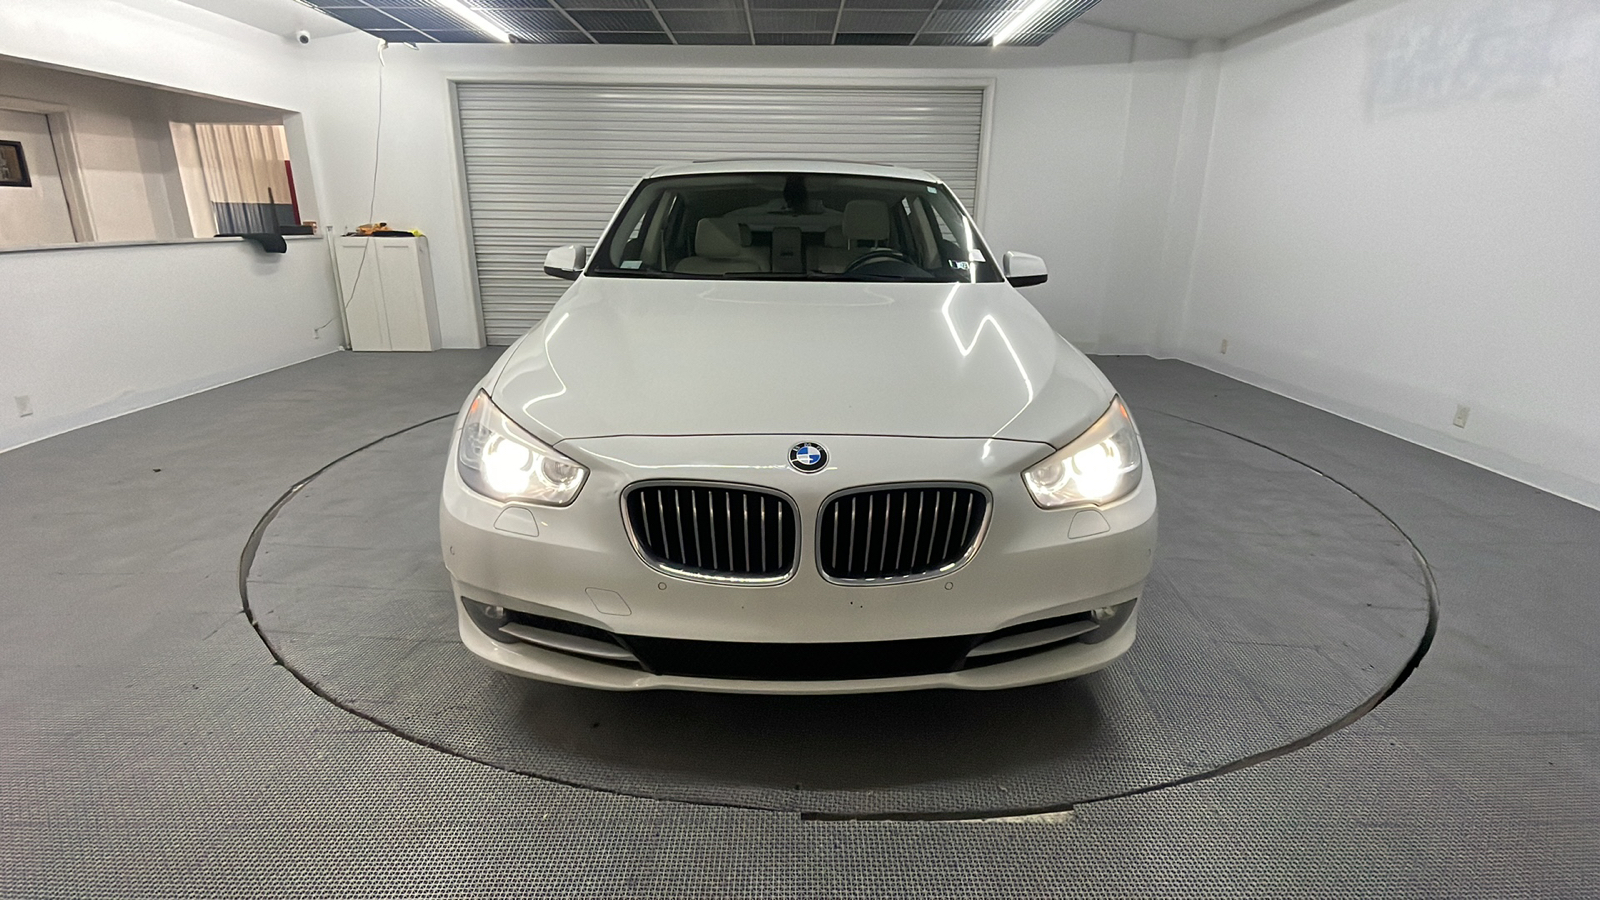 Car Connection Superstore - Used vehicle - Sedan BMW 5 SERIES GRAN TURISMO 2010